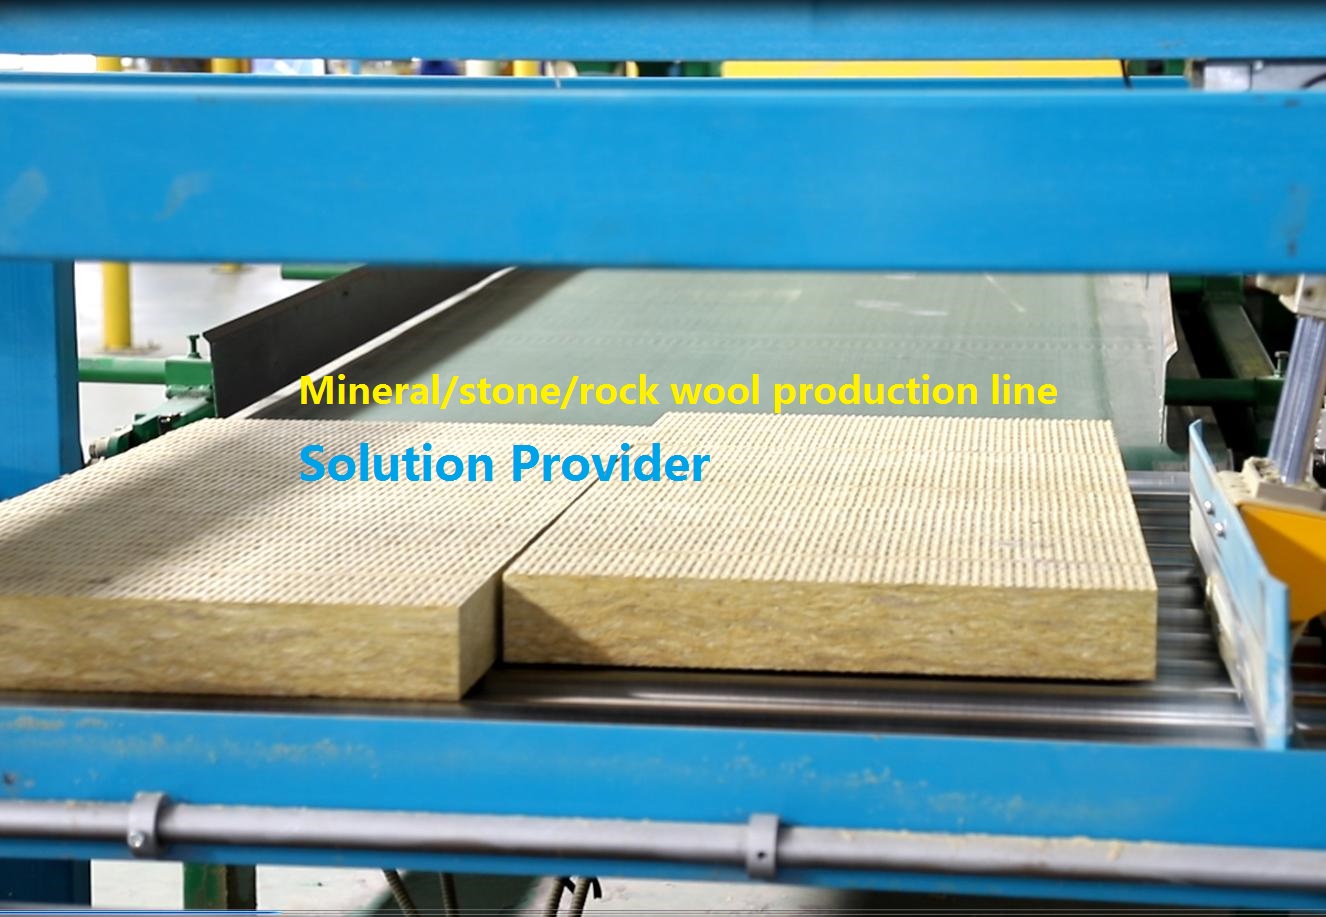 New company website of rock wool production line